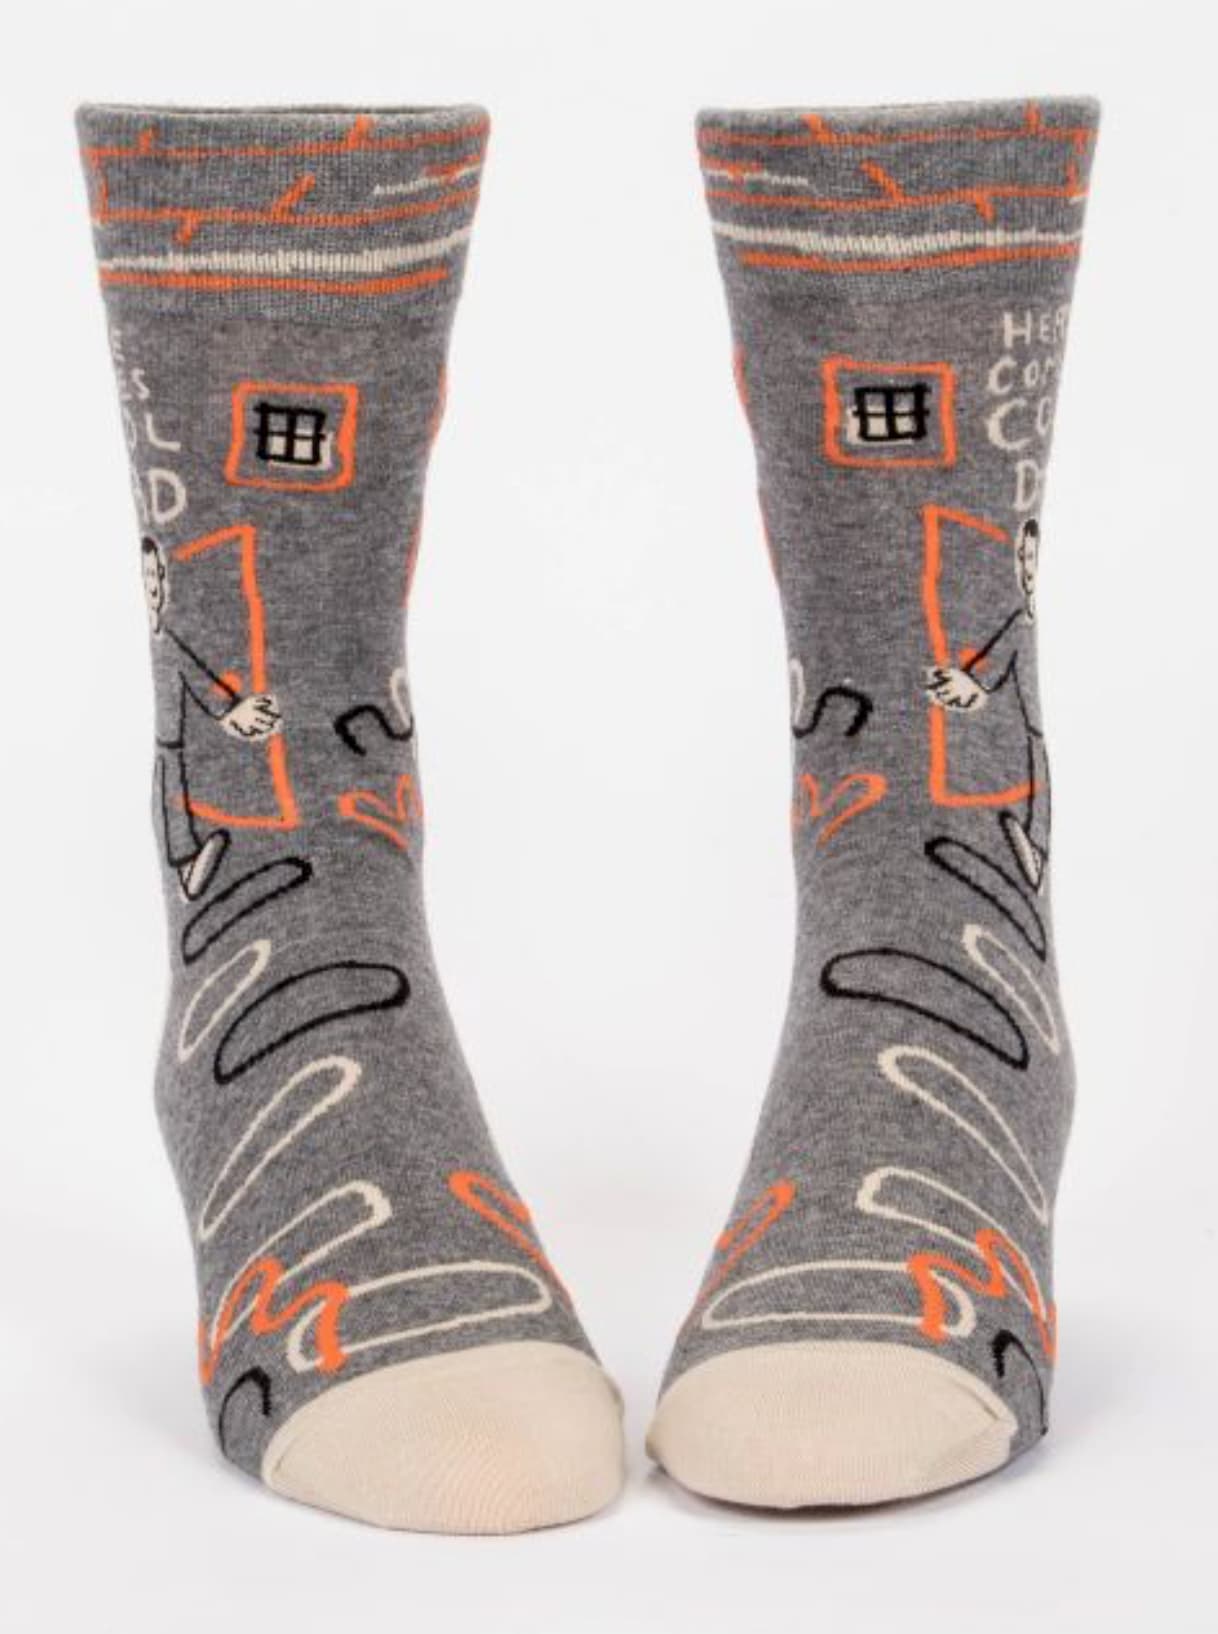 Here Comes Cool Dad Men's Crew Sock - The Sockery